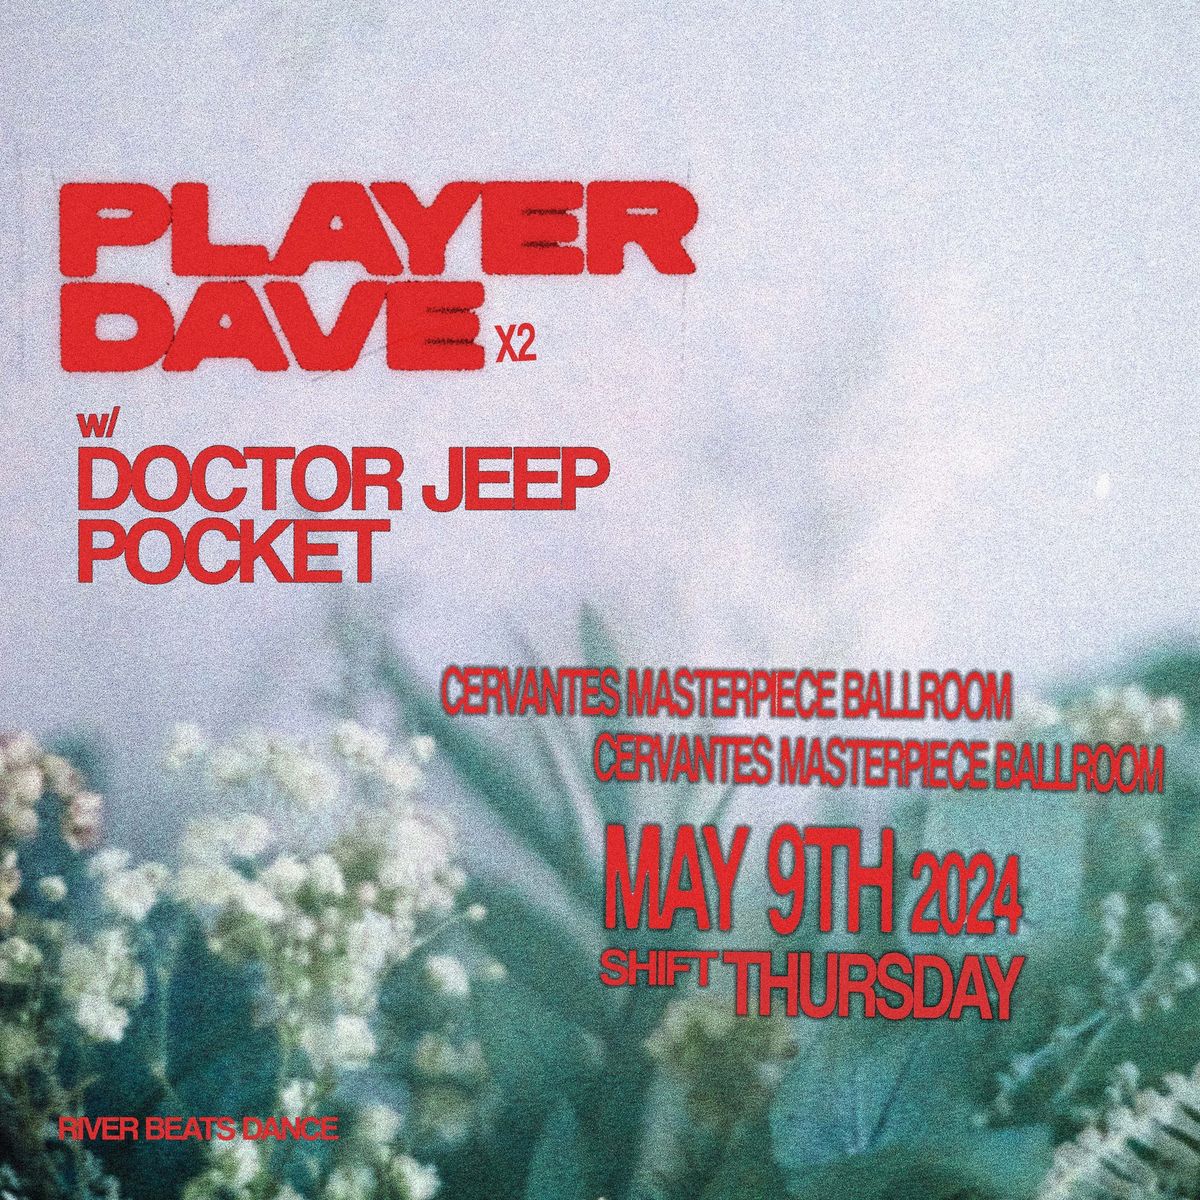 SHIFT Ft. Player Dave (Opening & Closing Sets) w\/ Doctor Jeep, Pocket